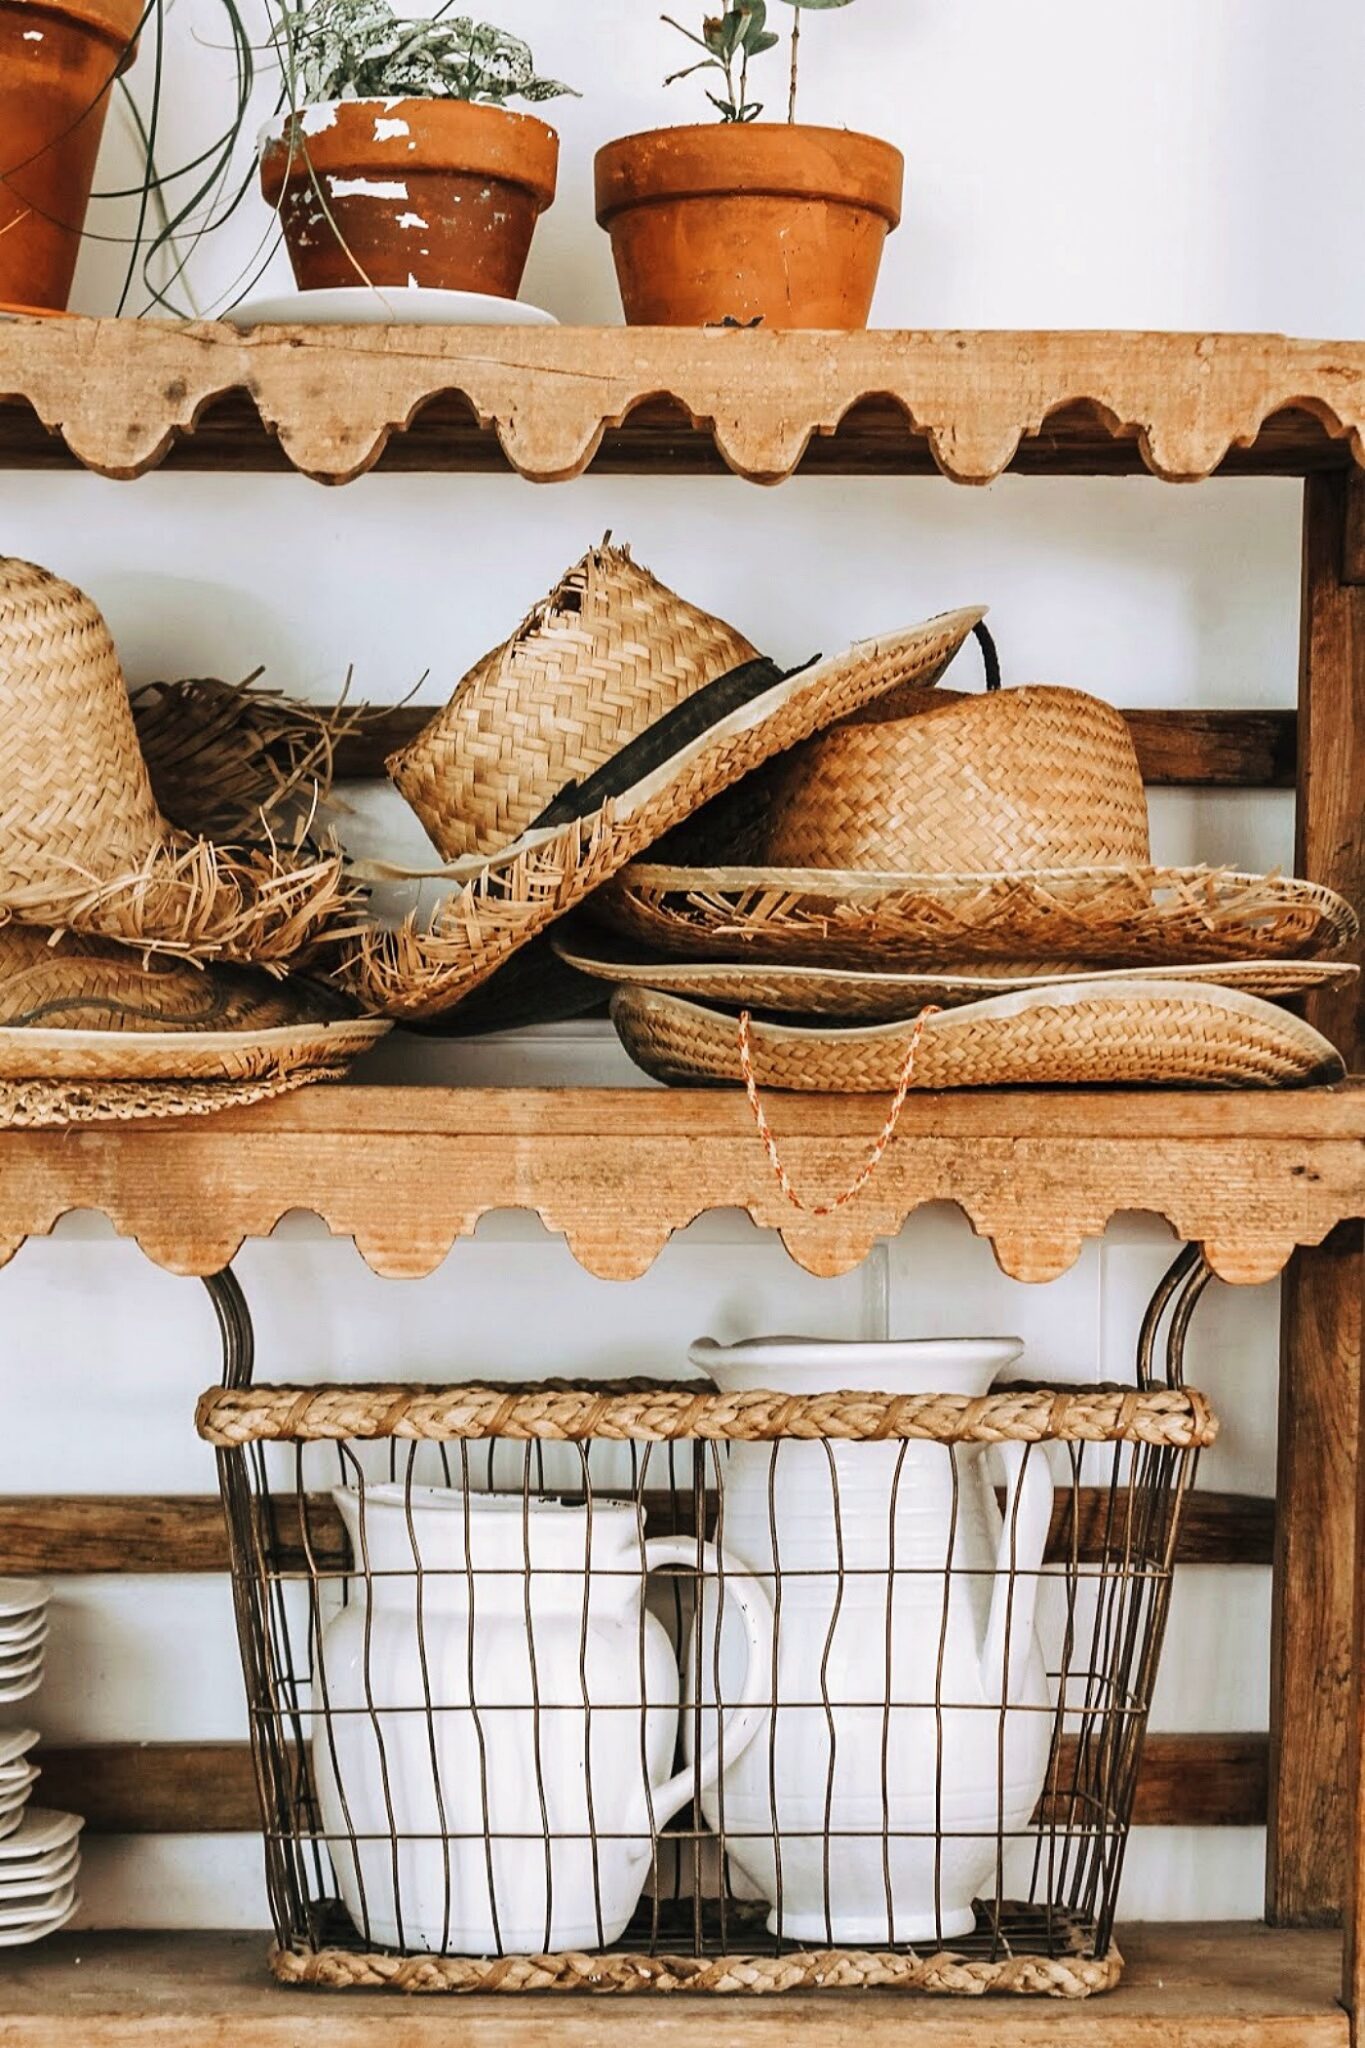 The Story Behind my Straw Hats - The Wicker House